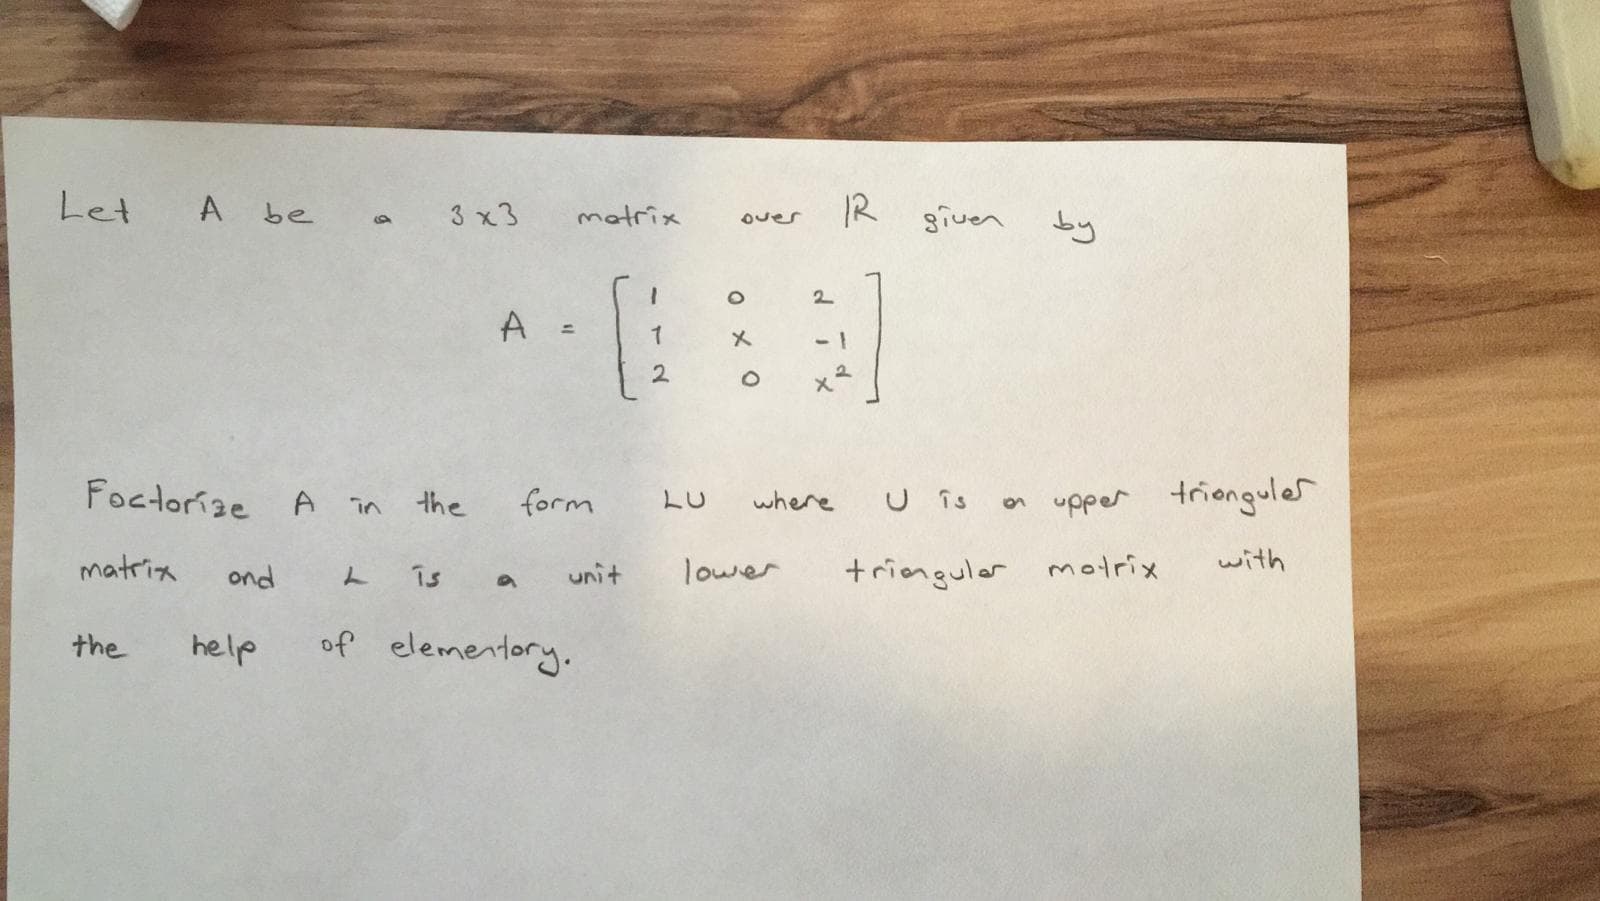 Let
A be
R given
3 x3
matrix
by
over
2.
-1
Foctorize A in
form
U is
n upper trionguler
the
LU
where
matria
ond
is
unit
lower
+ringuler motrix
with
the
help
of elementory.
